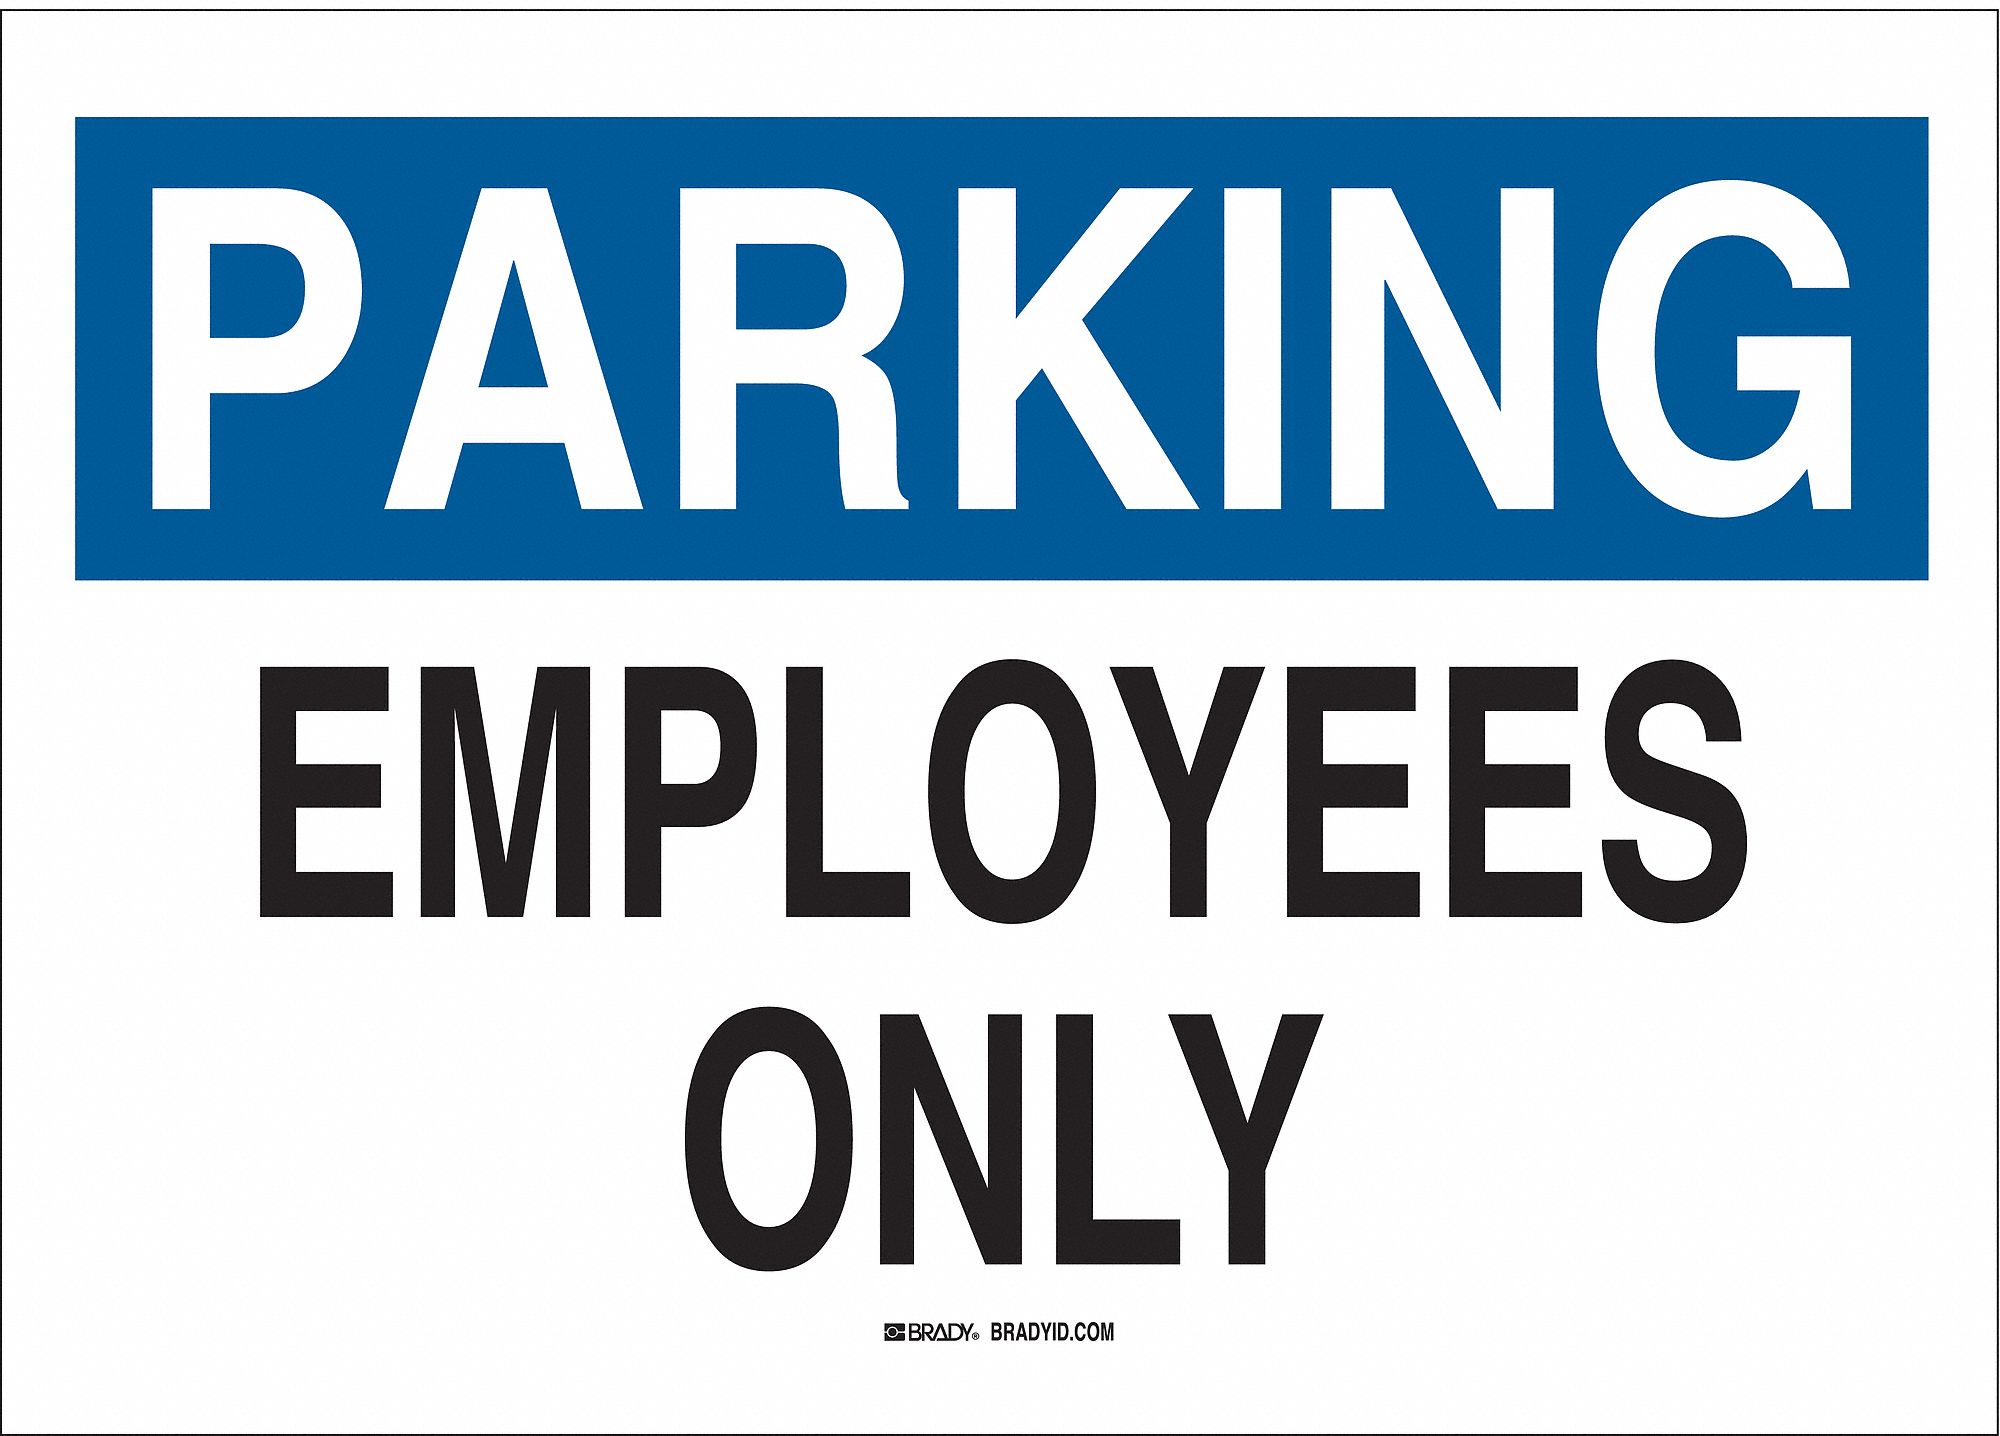 TextParking Employees Only Aluminum, Parking Sign Height 10